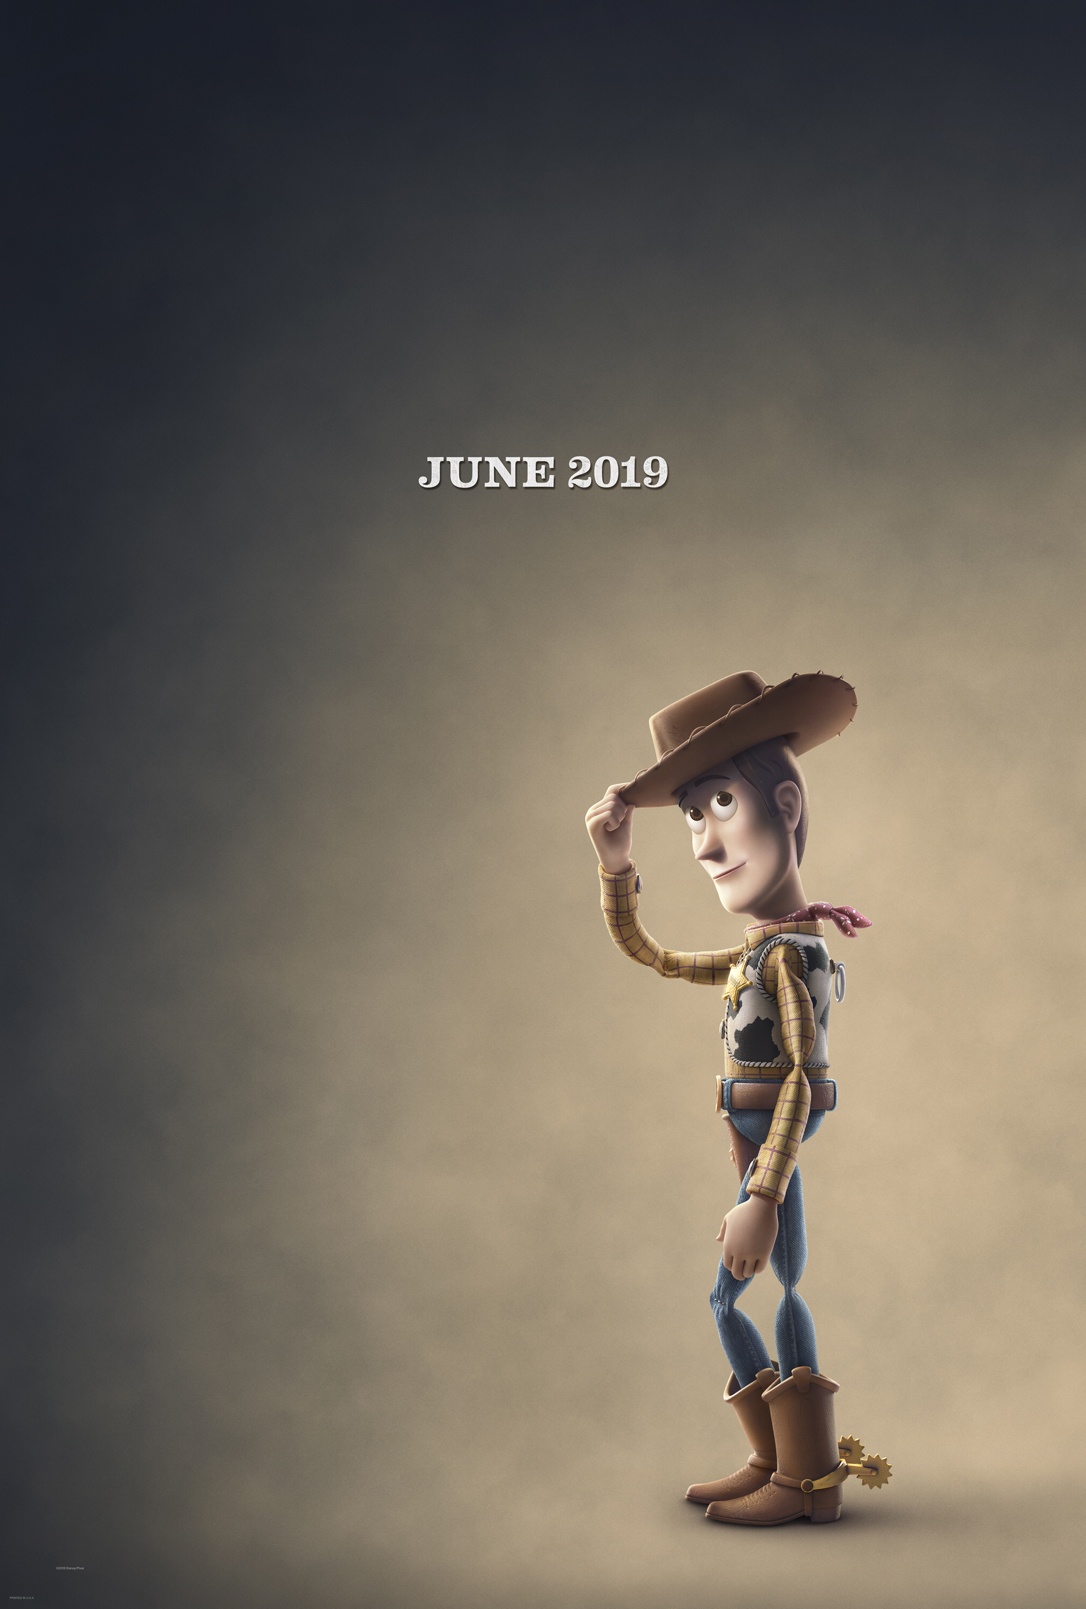 Toy Story 4 teaser poster